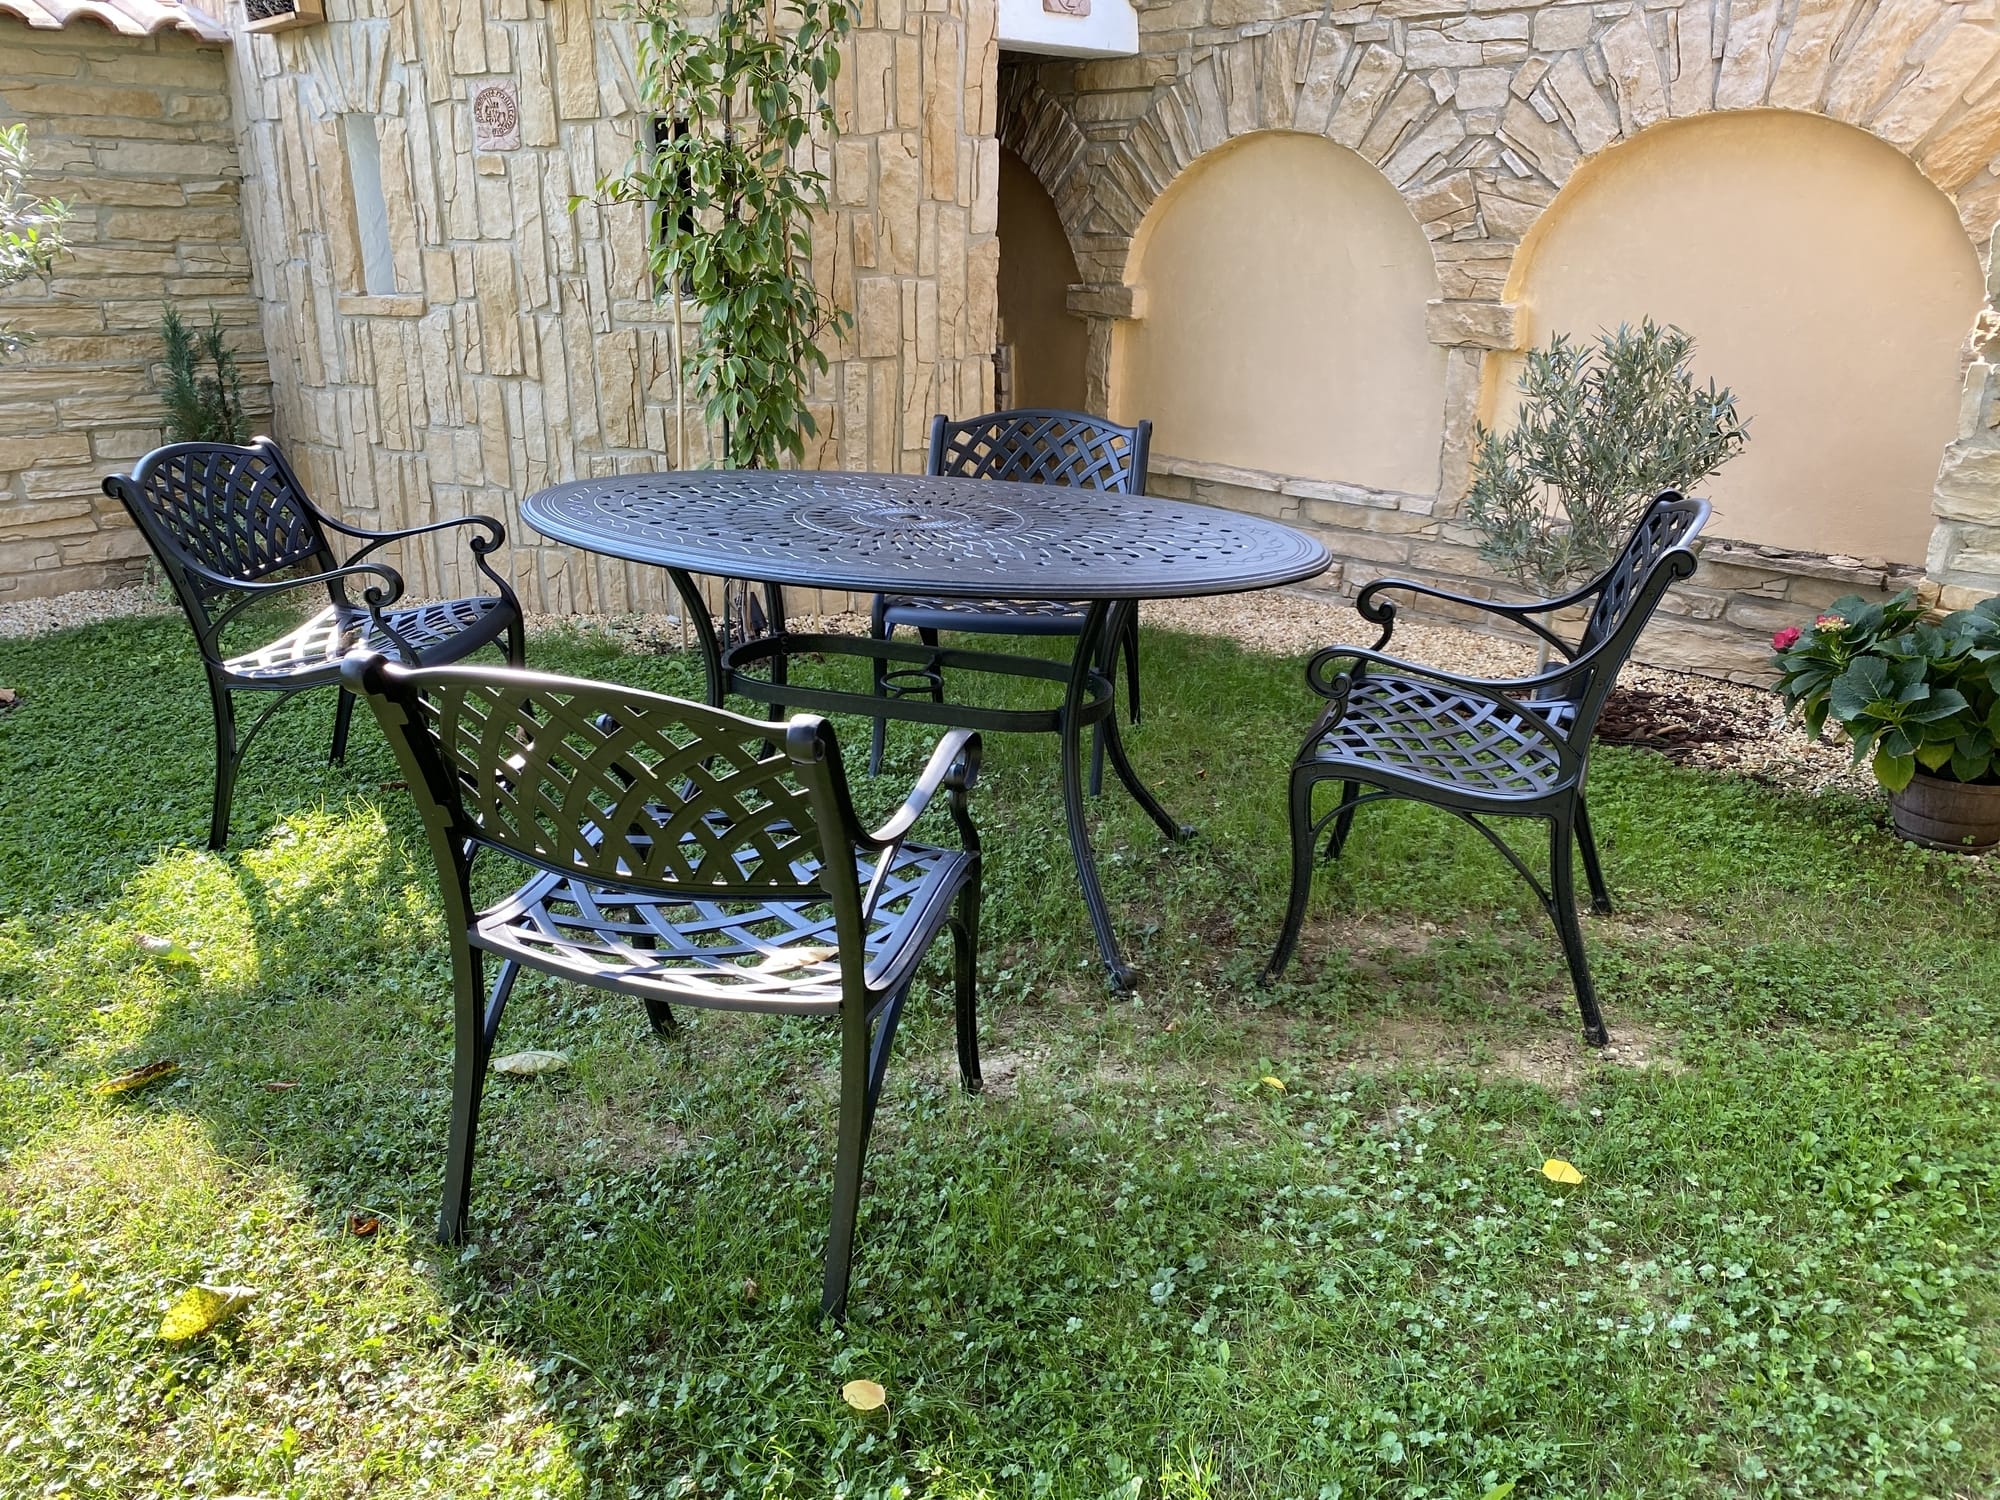 What Is The Best Shape Garden Table For, What Type Of Garden Furniture Is Best